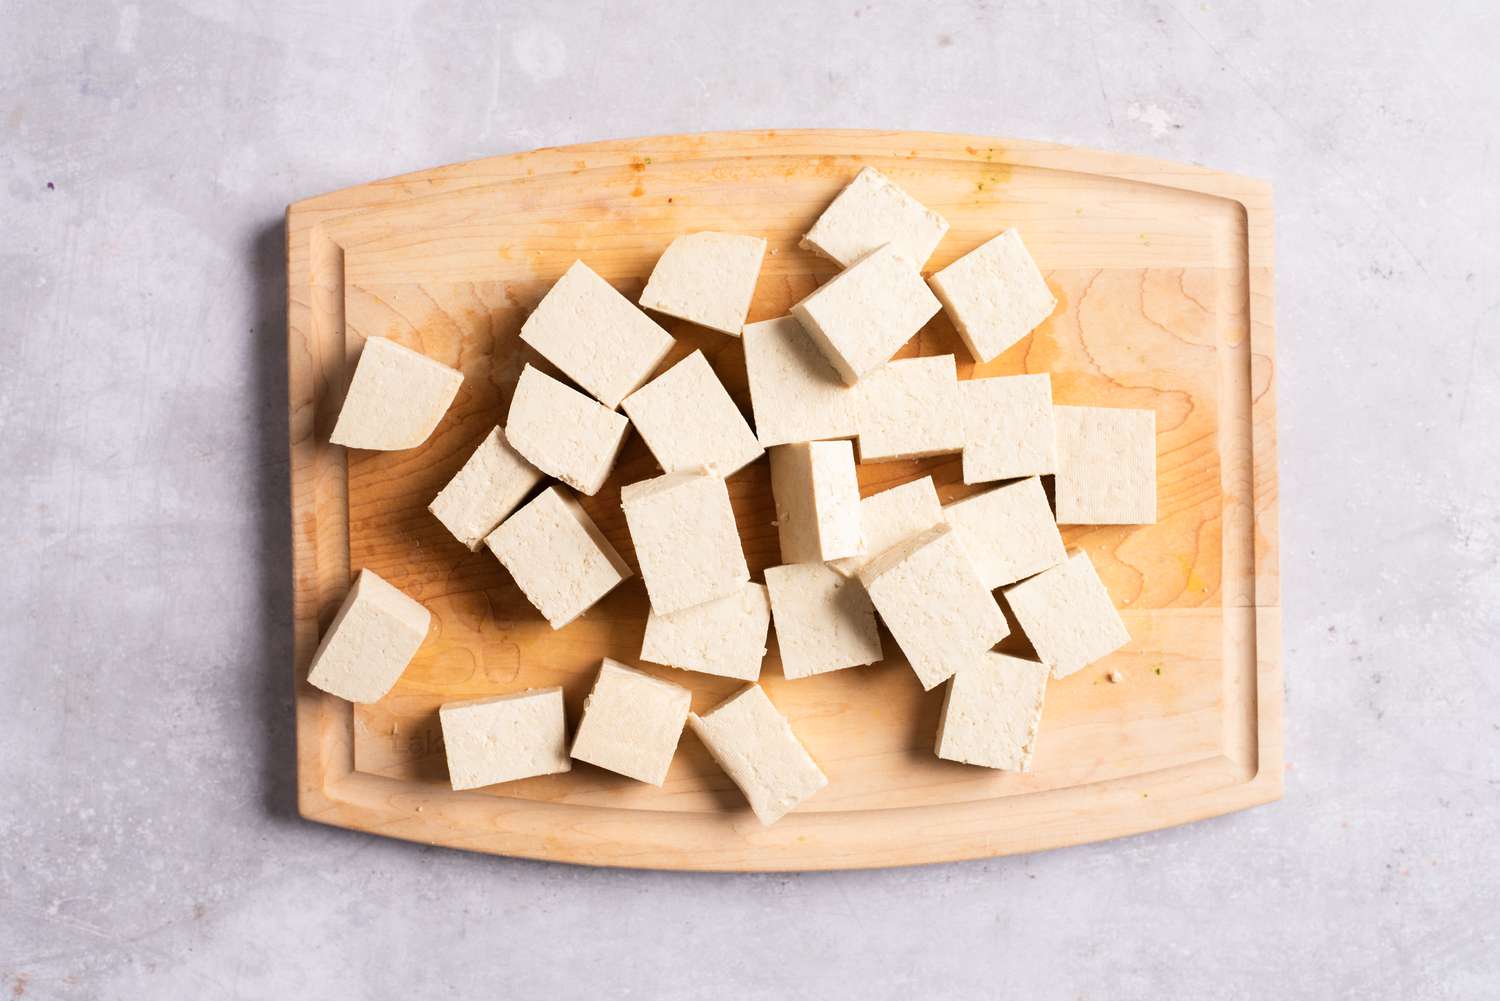 Slices of tofu on a cutting board